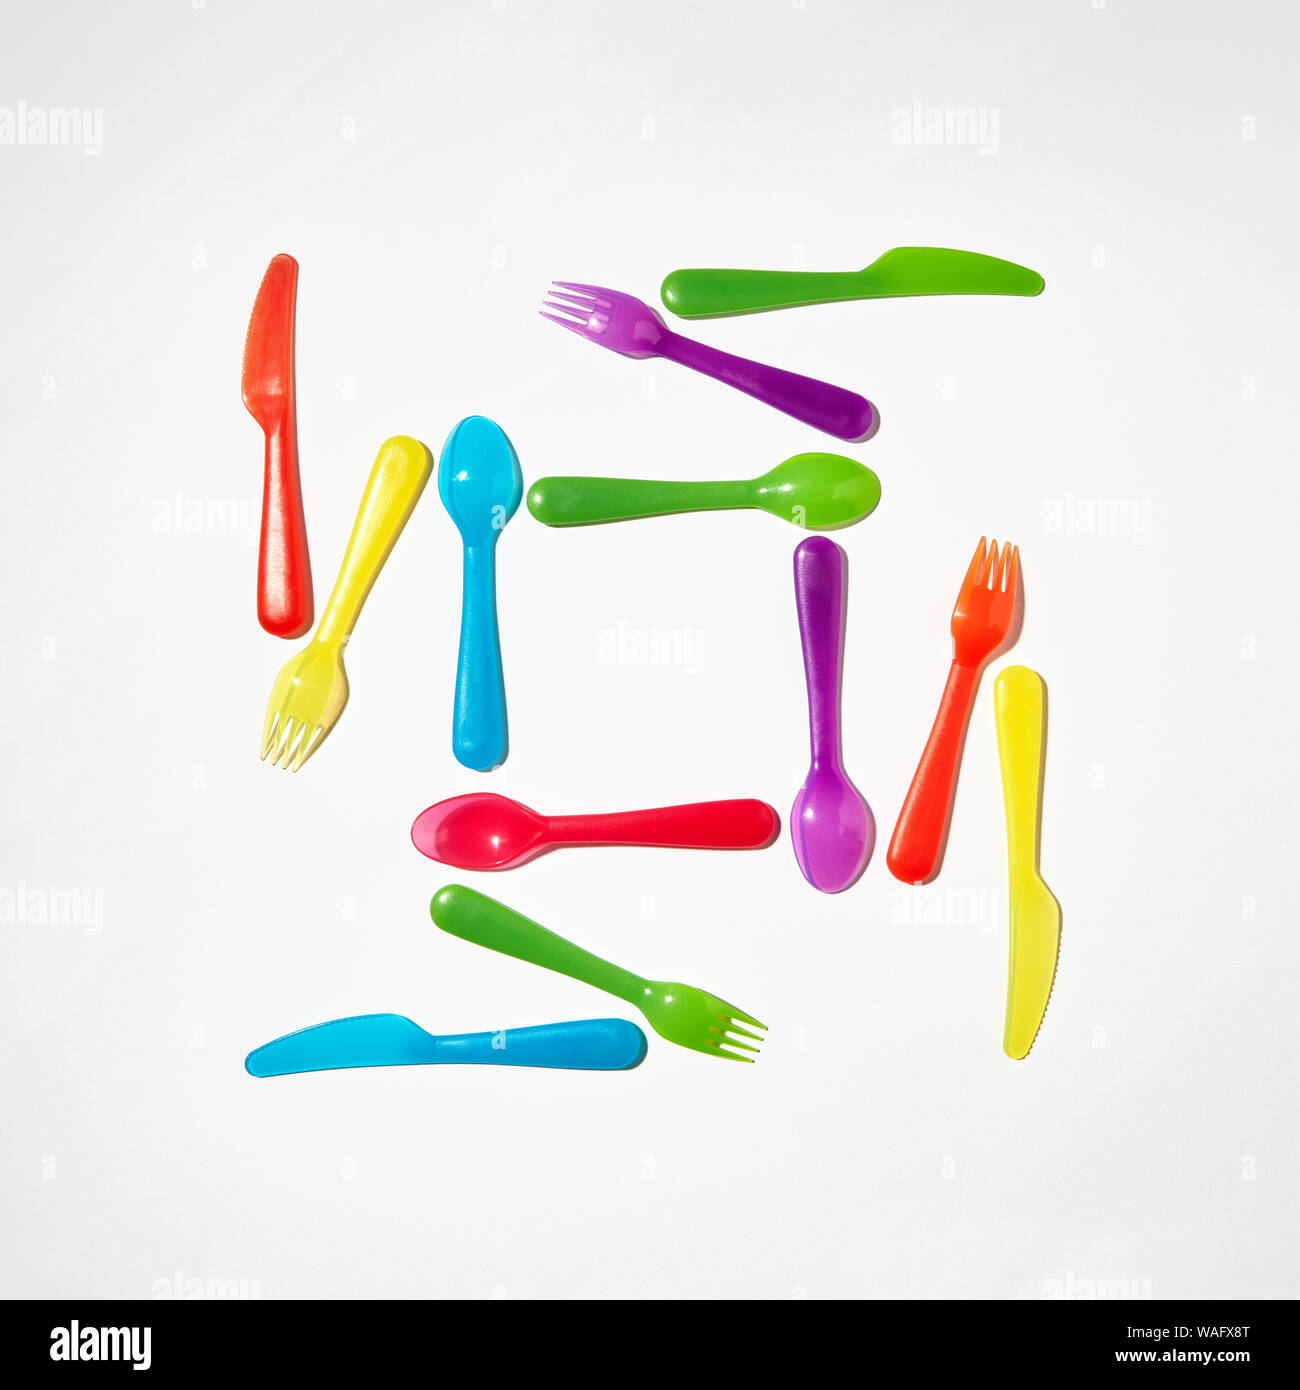 Set of plastic multicolored tableware on a light grey background with copy space. Top view. Stock Photo